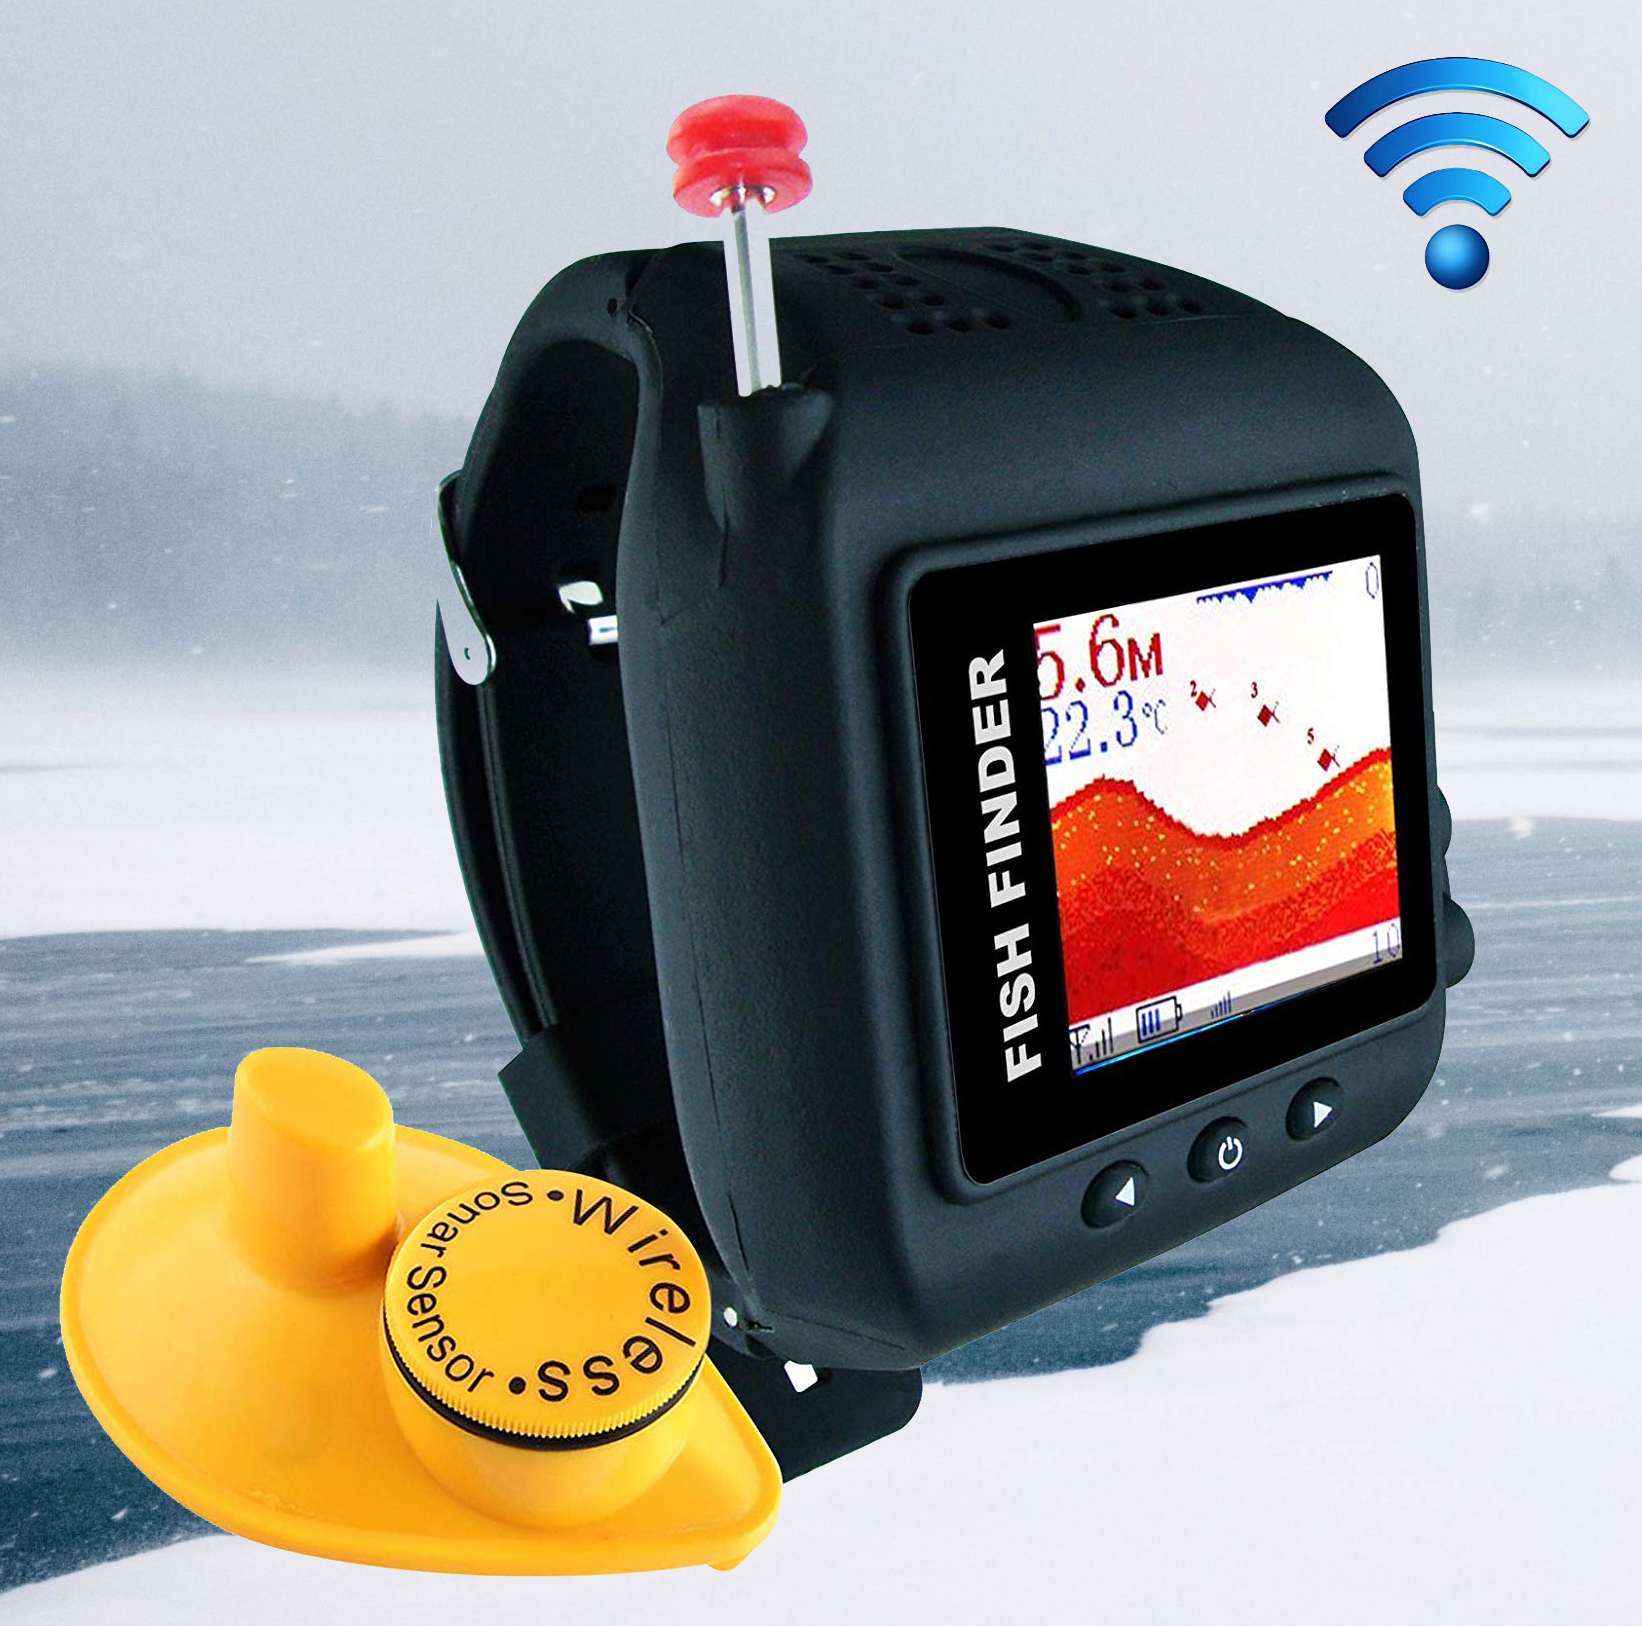 Ice Fishing Wireless Color Fish & Depth Finder Wrist Watch - All